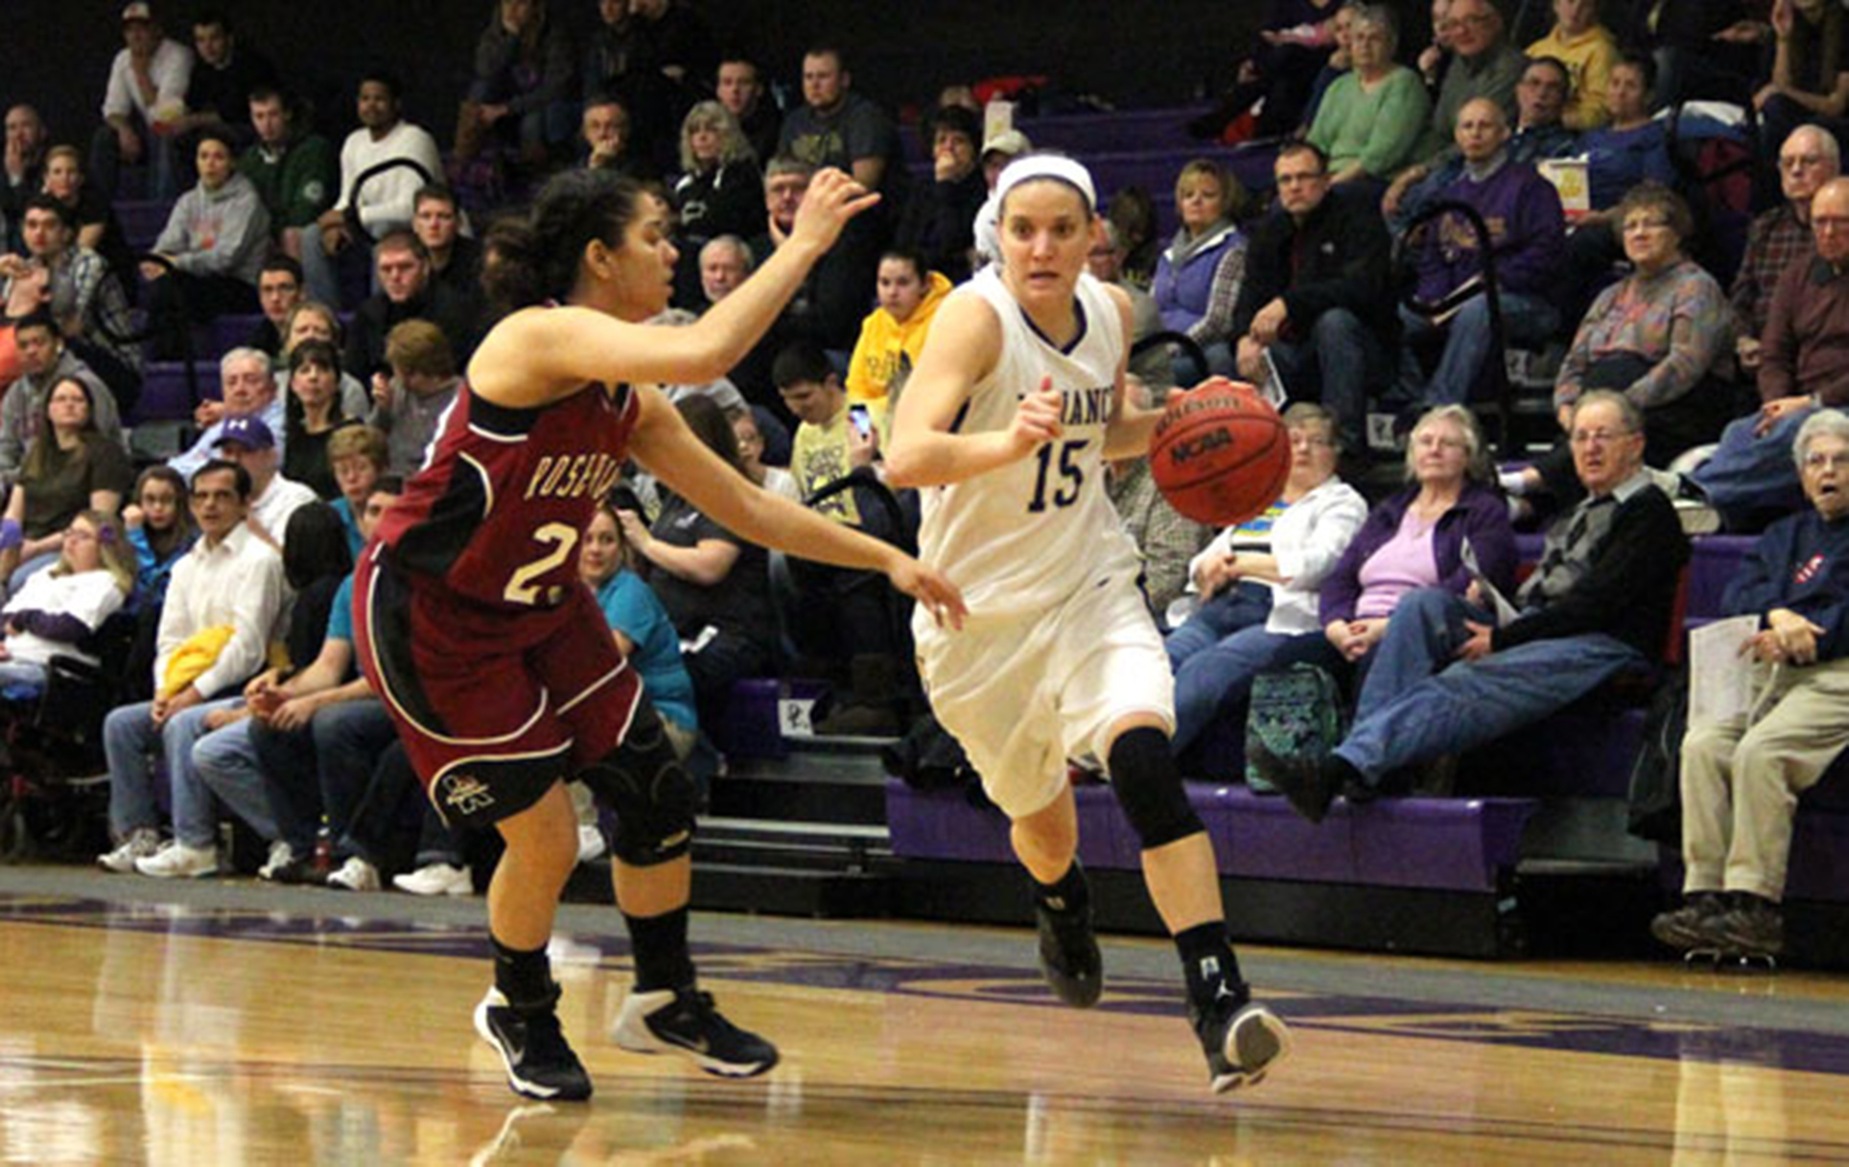 Rose-Hulman Downs DC, 69-59, in HCAC Action